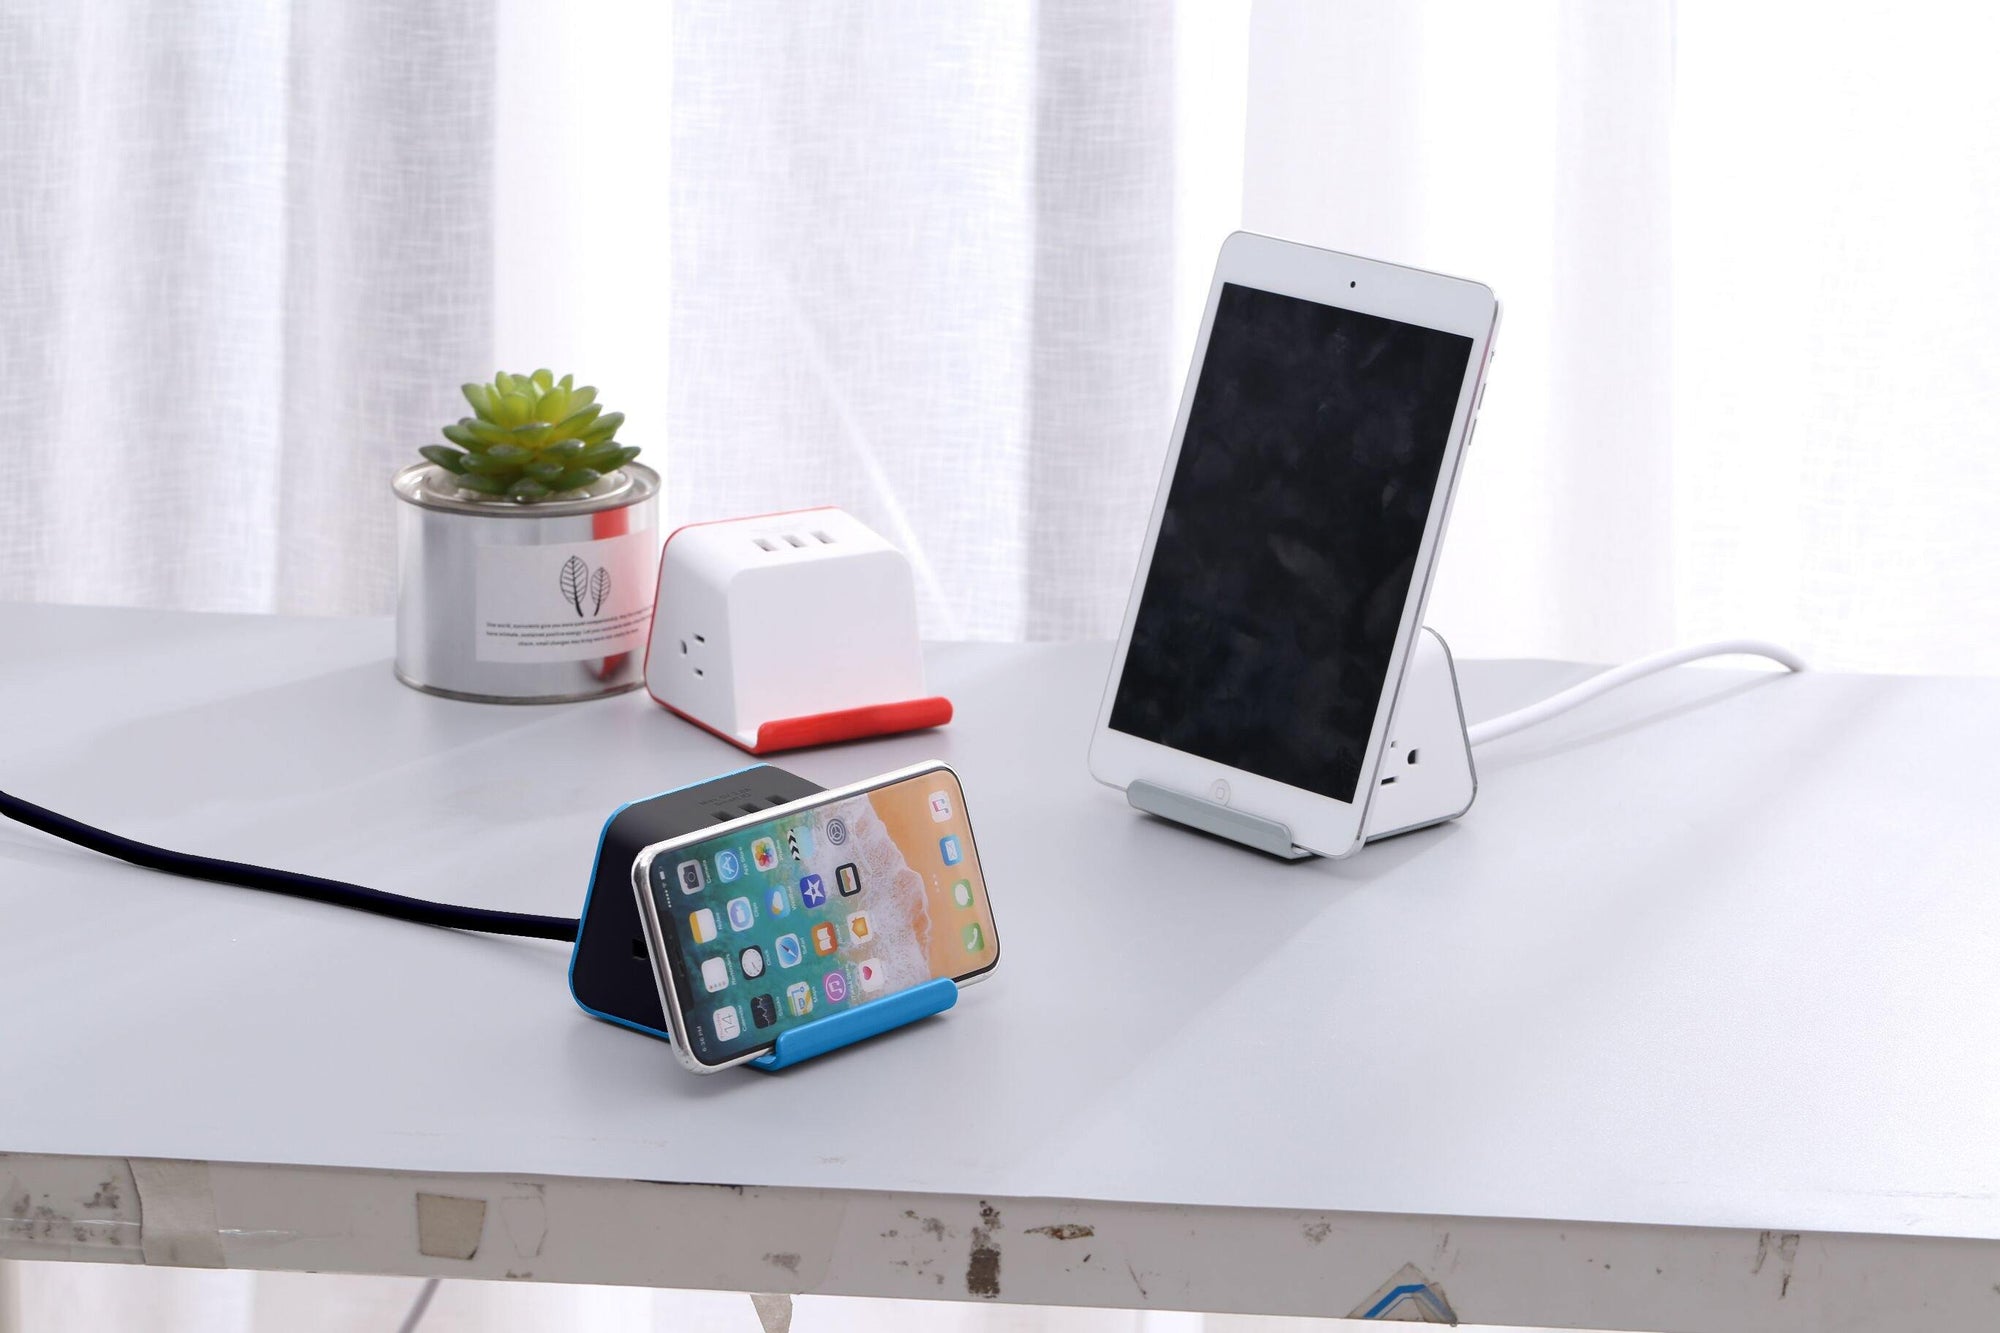 MyDesktop 29W Wireless Charging Stand with 3 USB Ports and 2 Power Outlets - Grey - RapidX